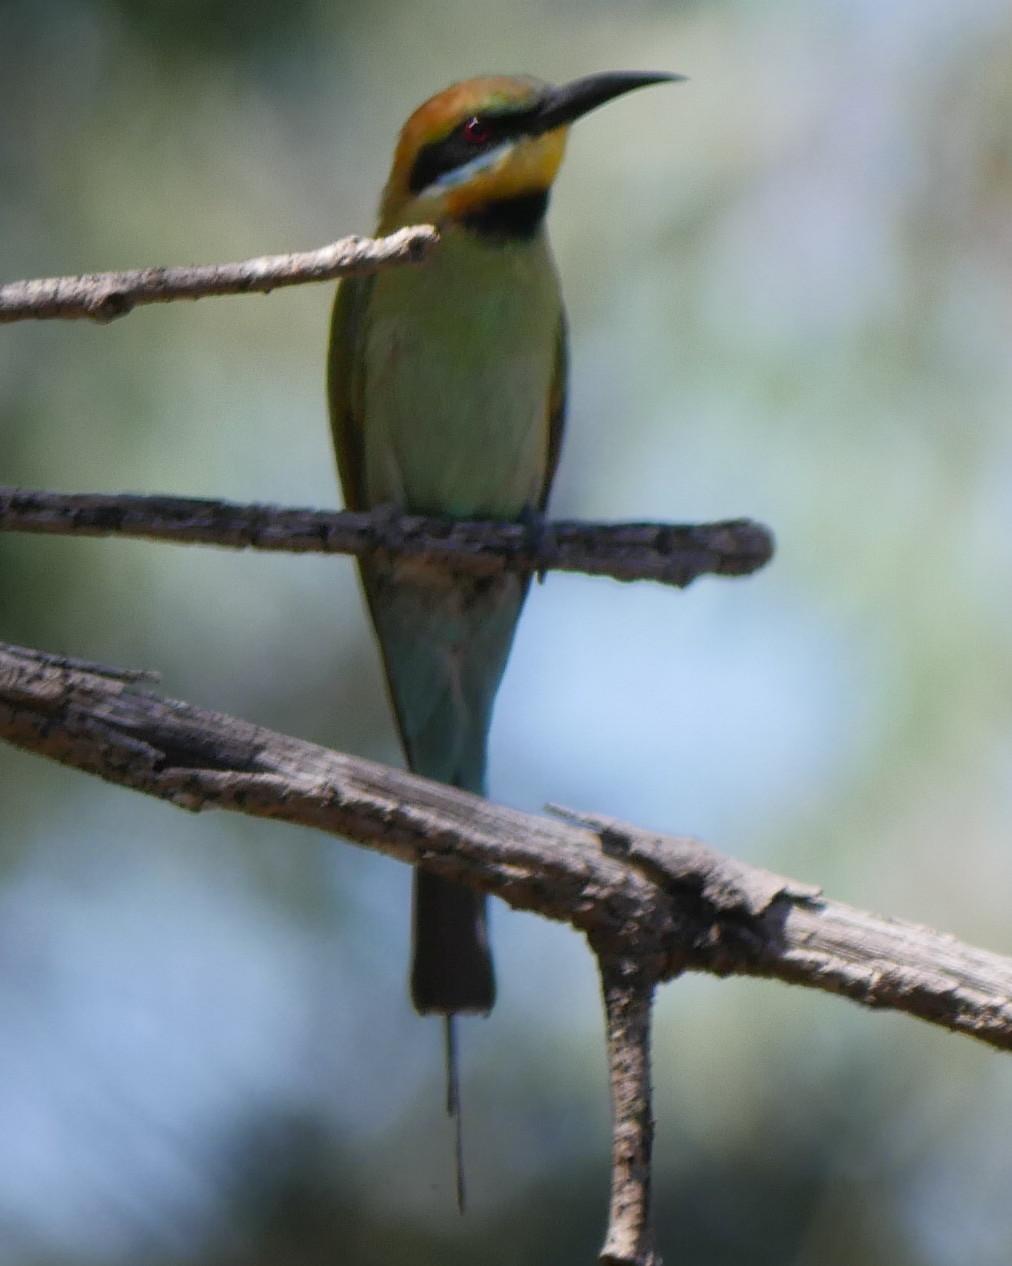 Rainbow Bee-eater Photo by Peter Lowe